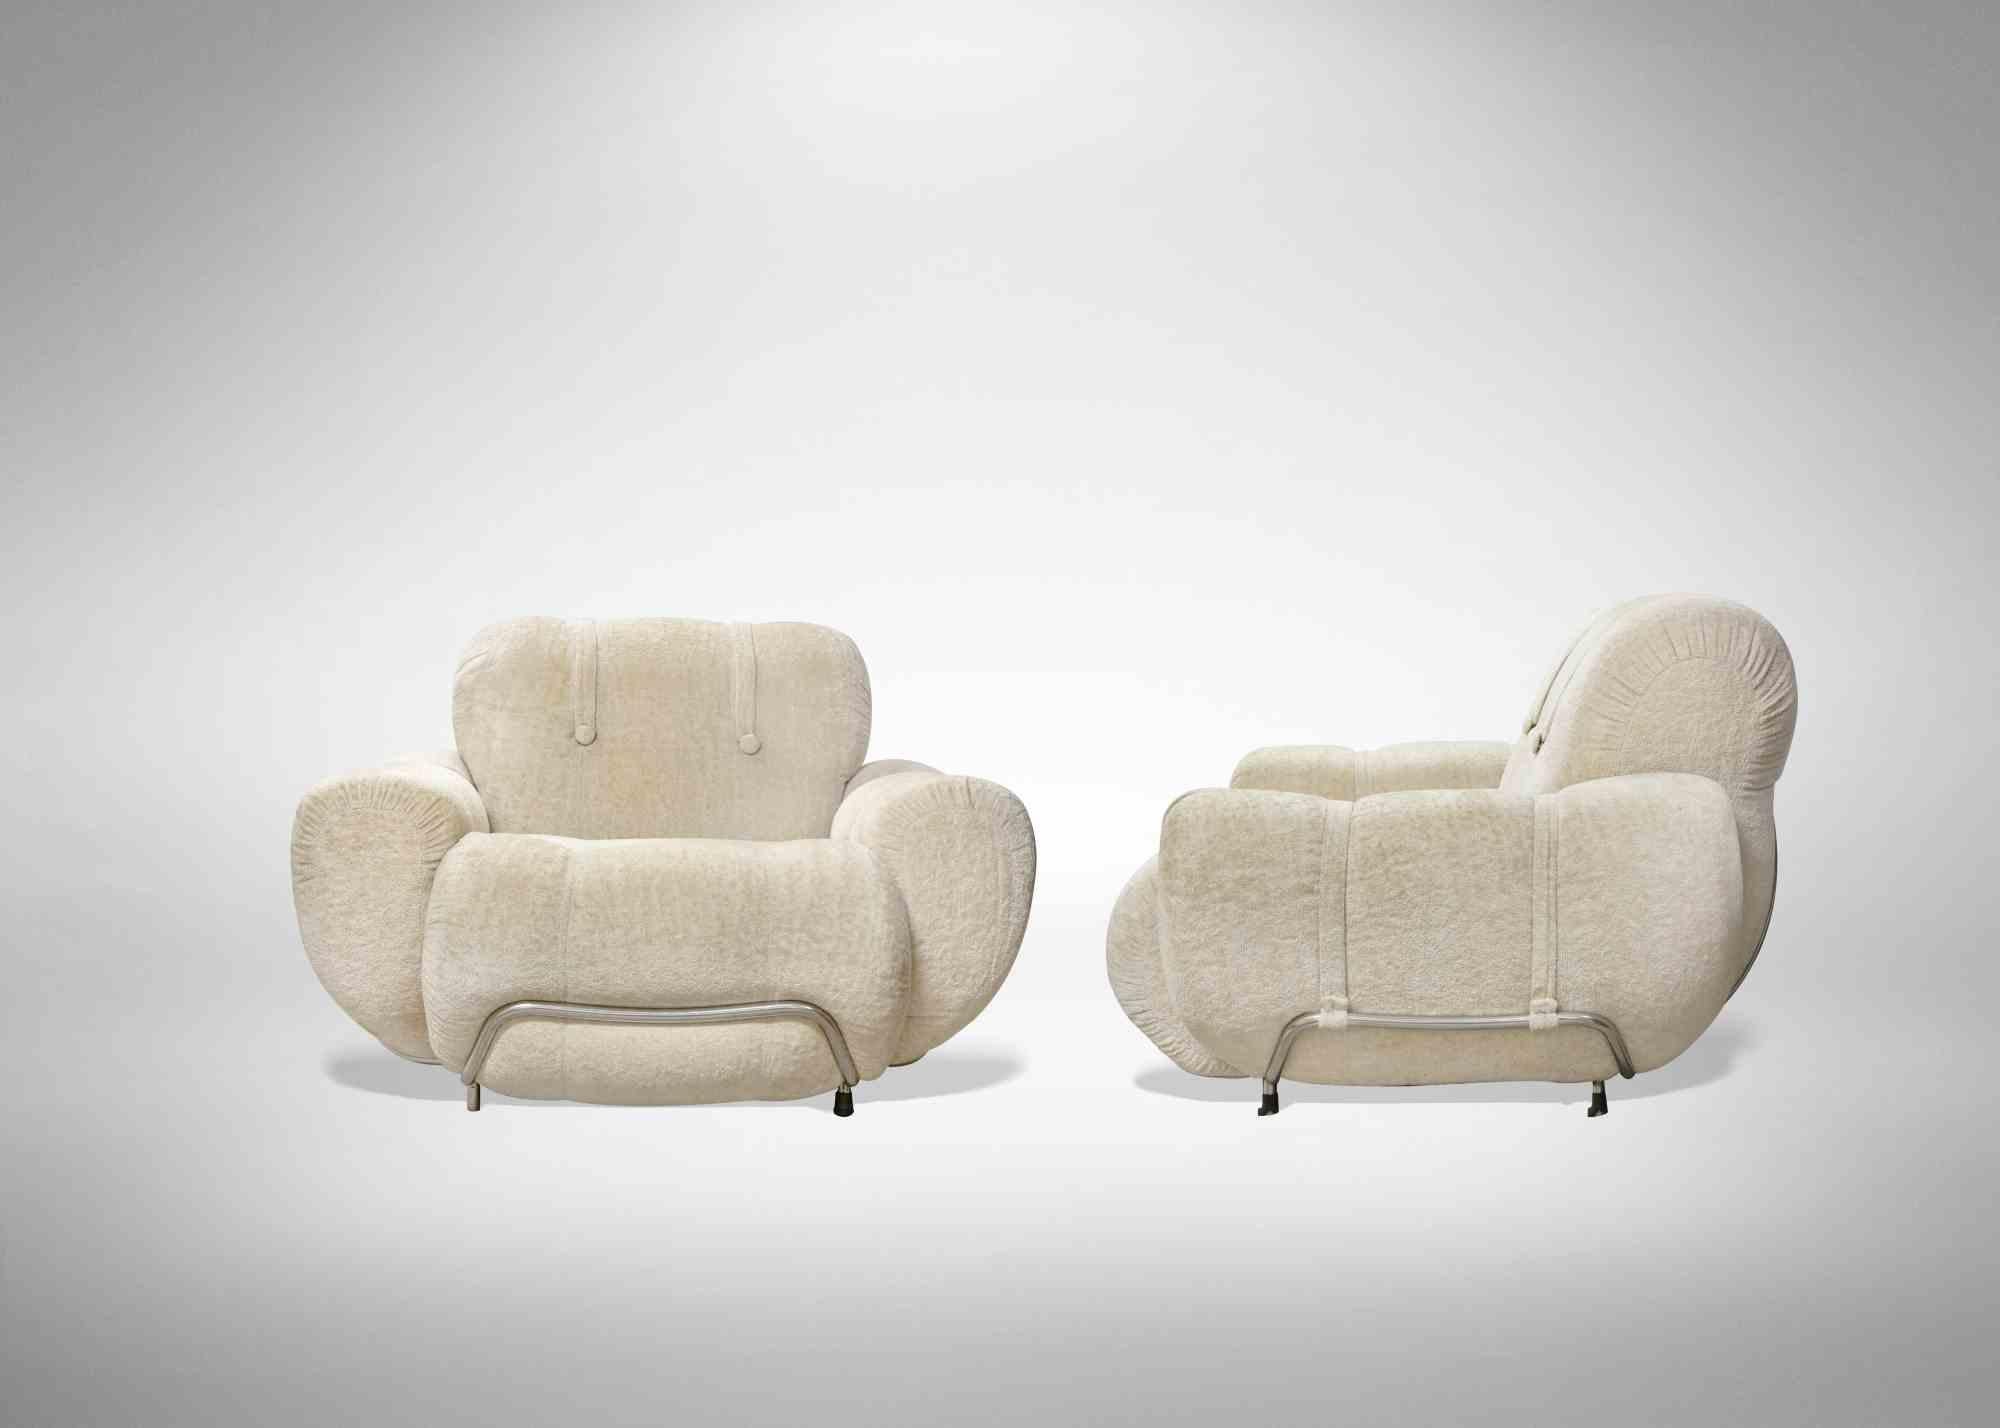 Italian Sofa and Armchairs Set in the Style of Adriano Piazzesi, 1970s For Sale